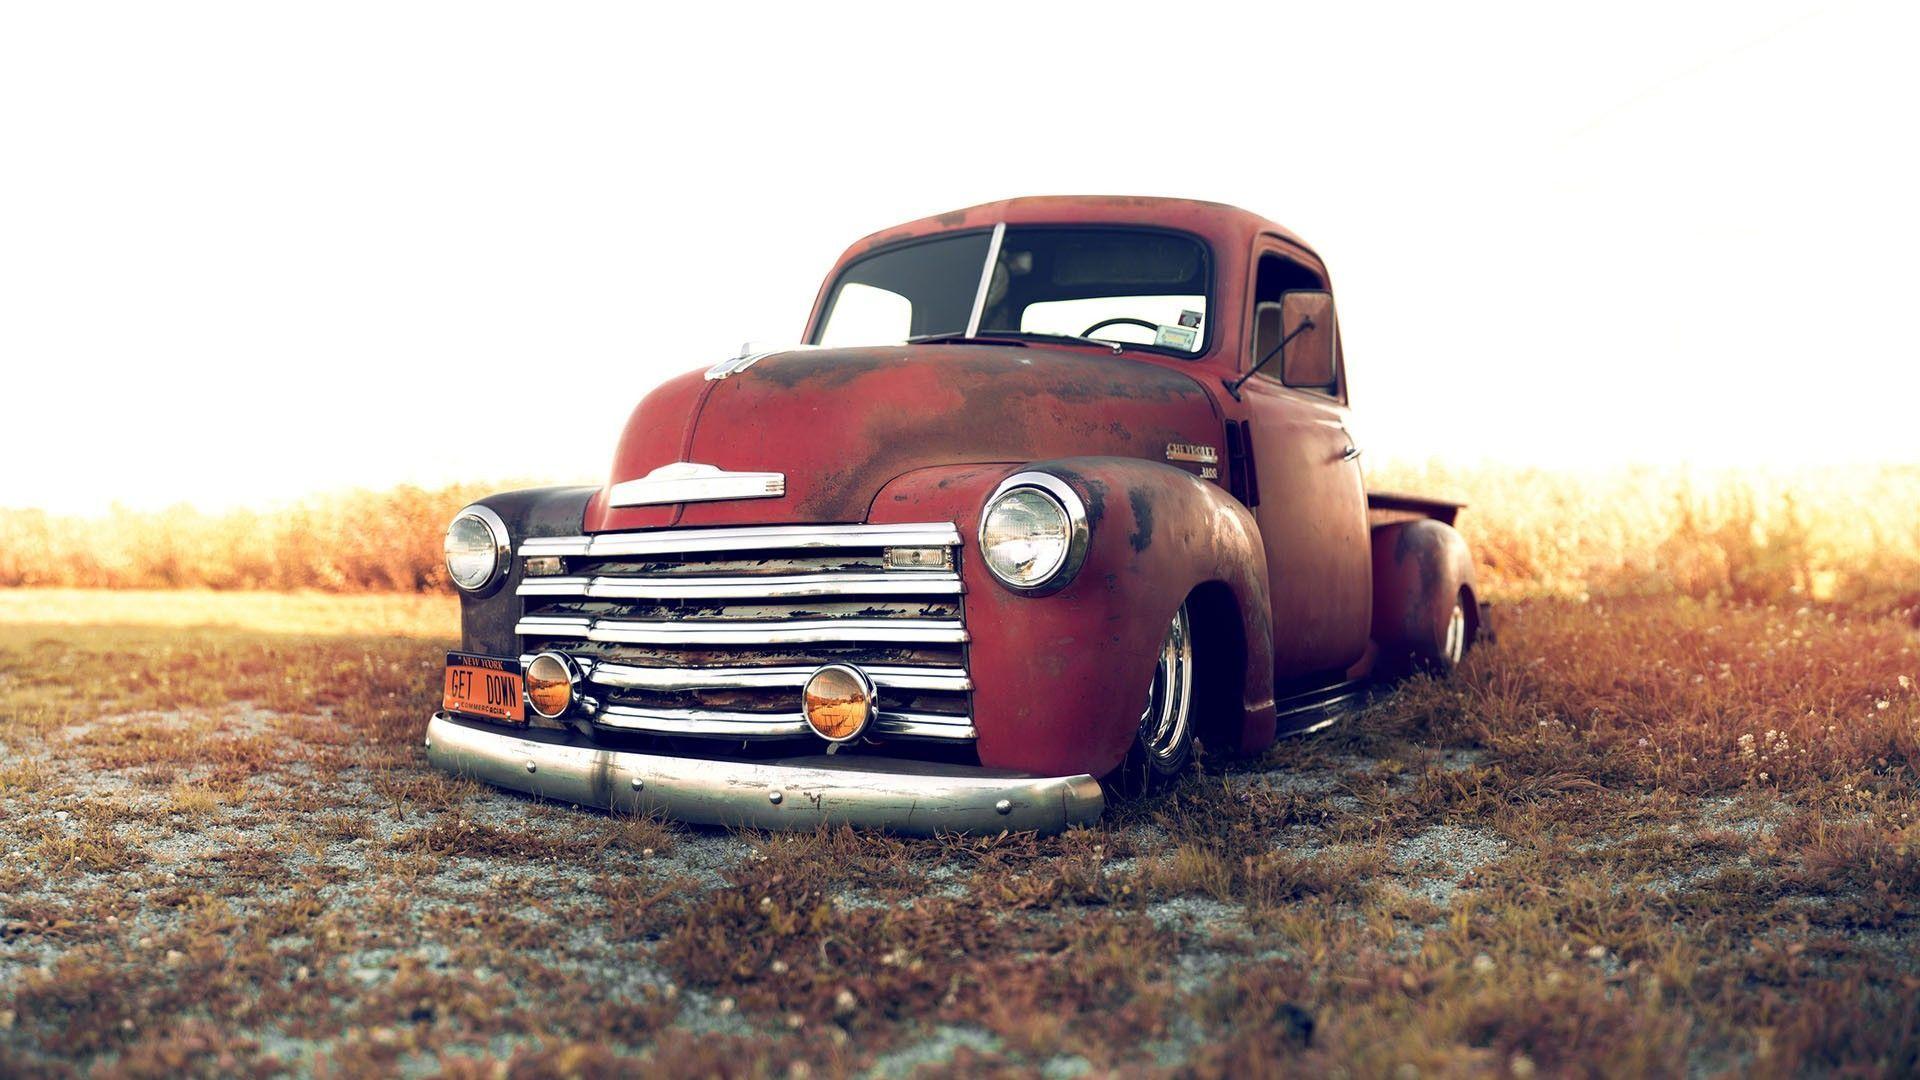 Ford dump truck wallpaper by ThatAcGuyBrady  Download on ZEDGE  263d